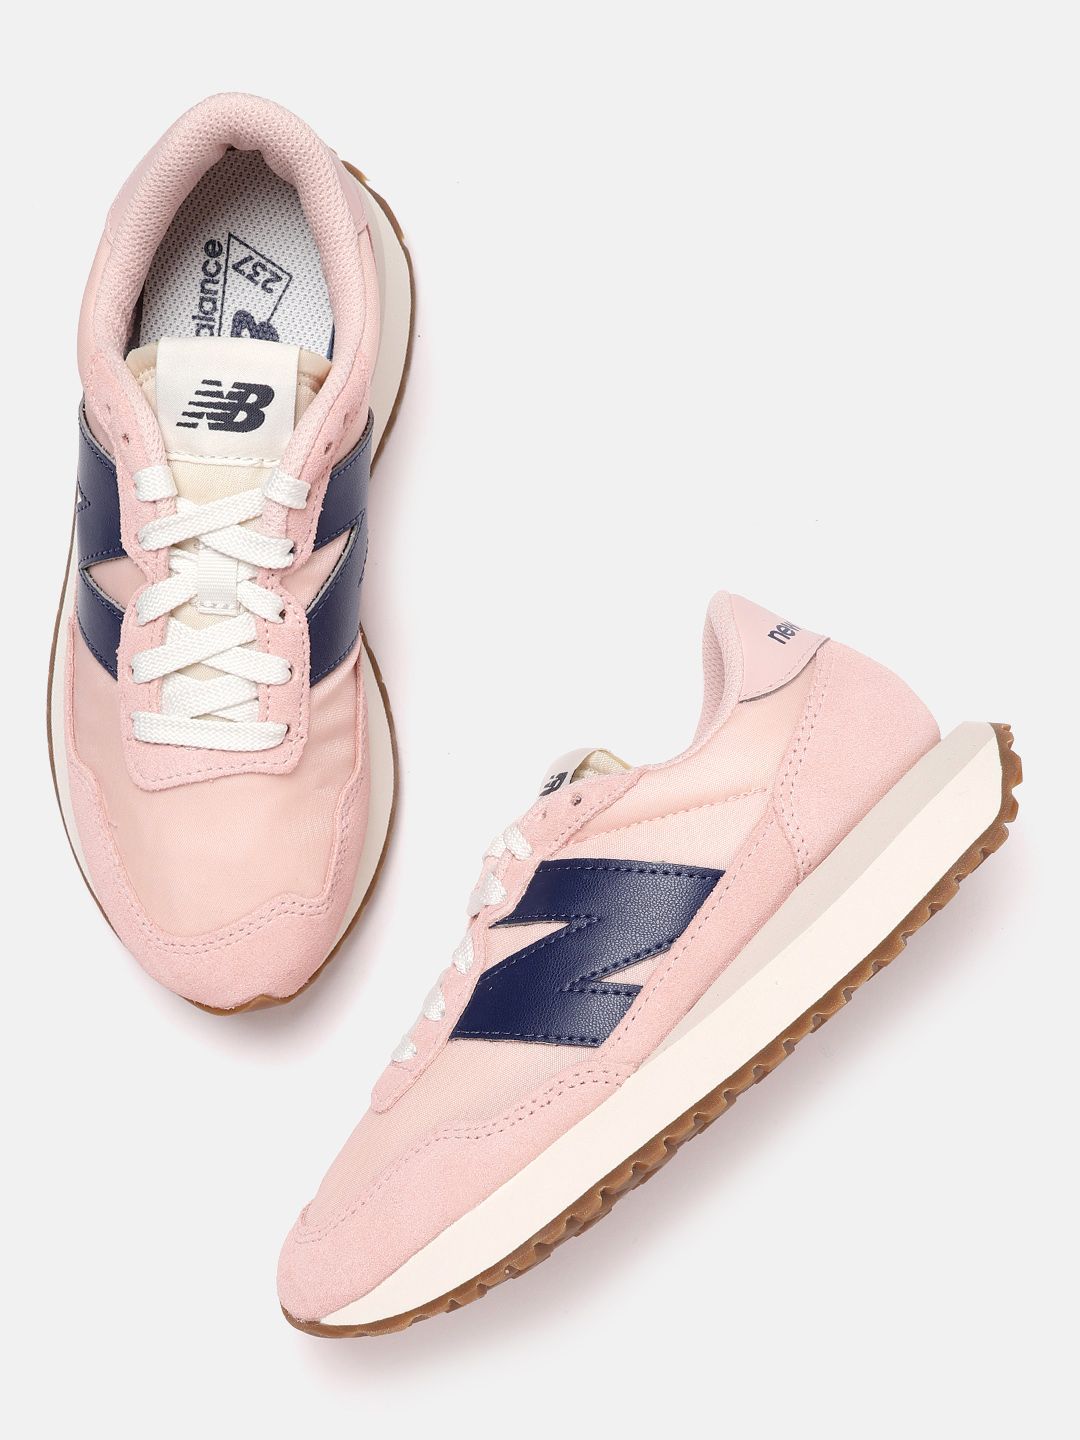 New Balance Women Pink Solid Suede Sneakers Price in India